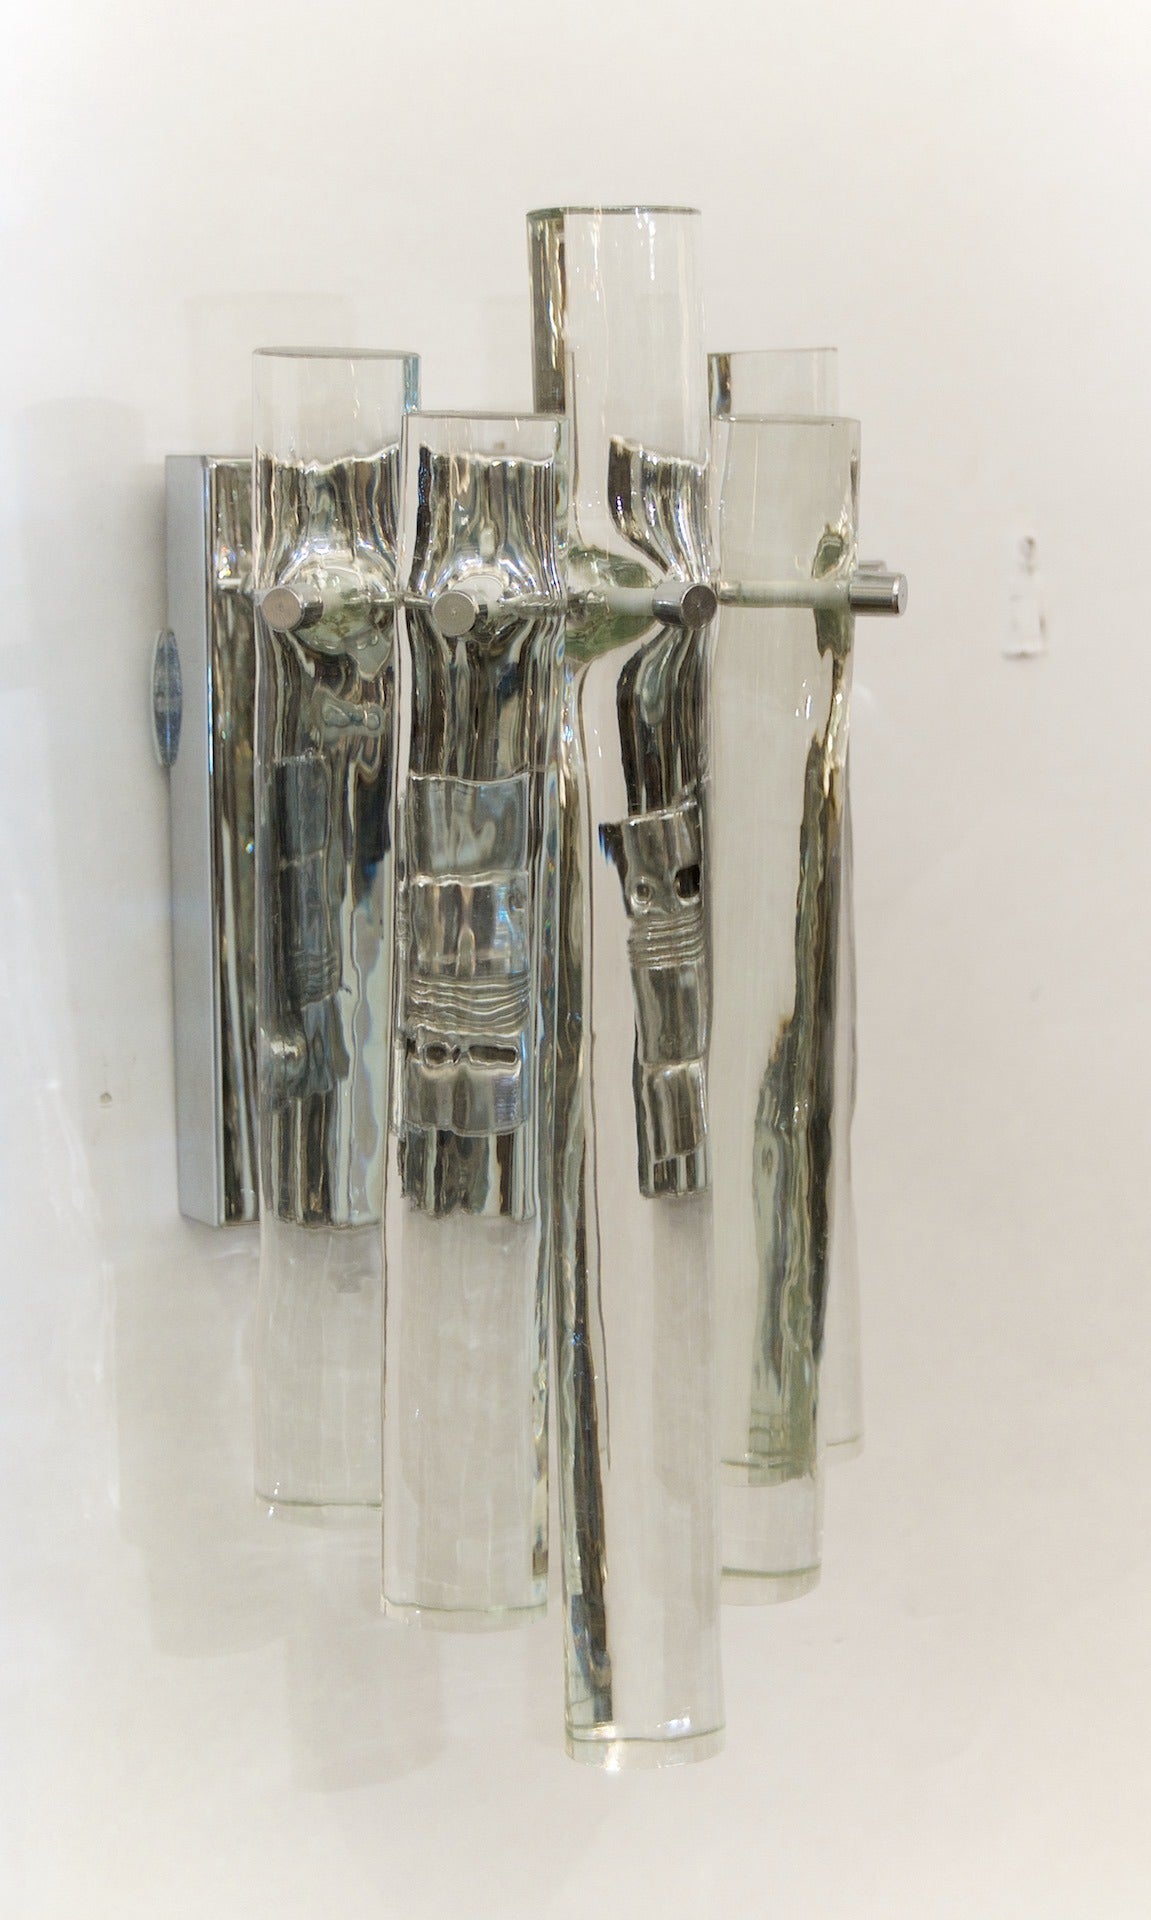 Kinkeldey Ice Stick Crystal Wall Sconces In Excellent Condition For Sale In Stamford, CT